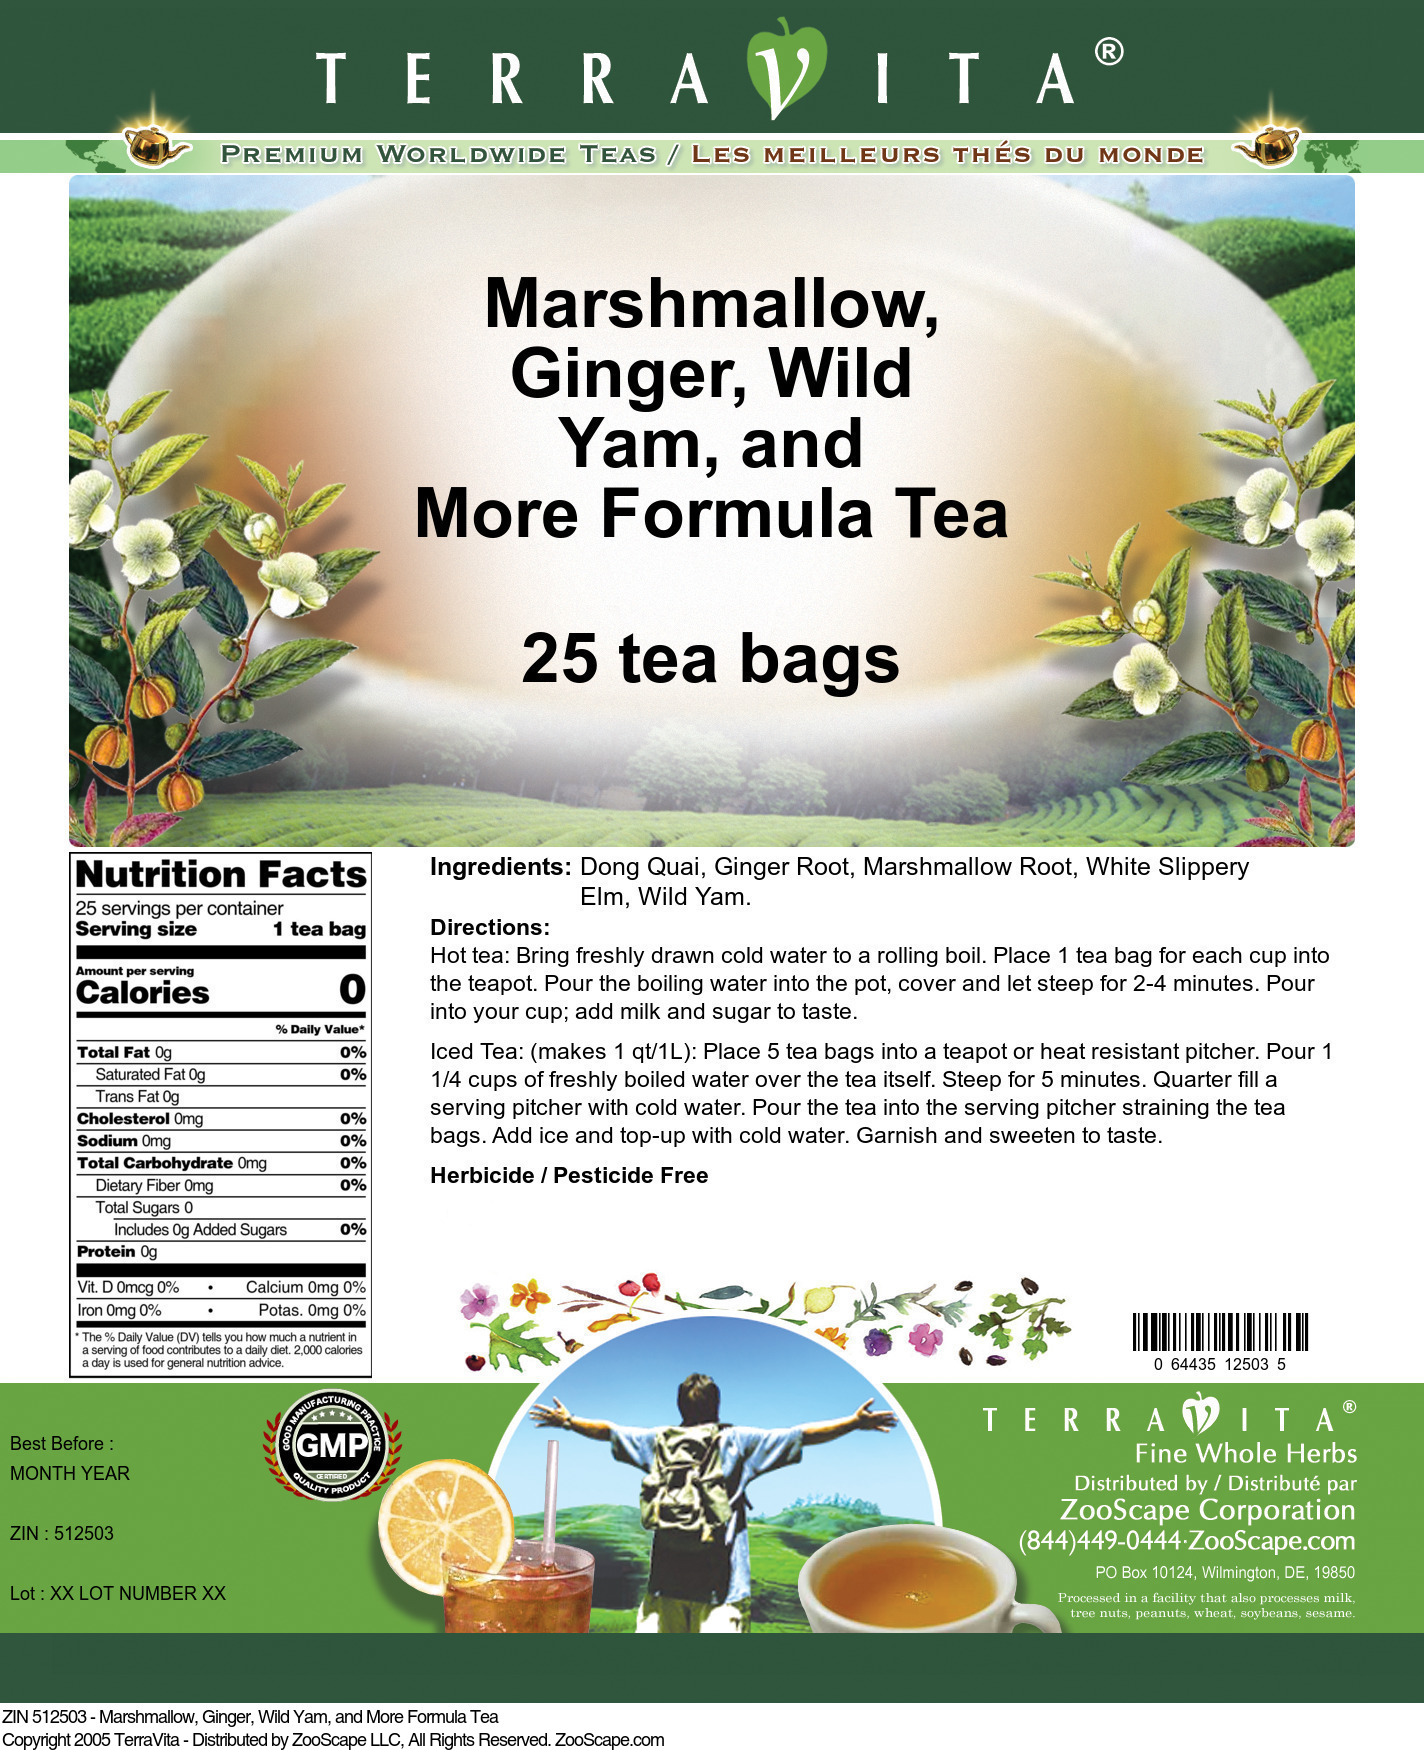 Marshmallow, Ginger, Wild Yam, and More Formula Tea - Label